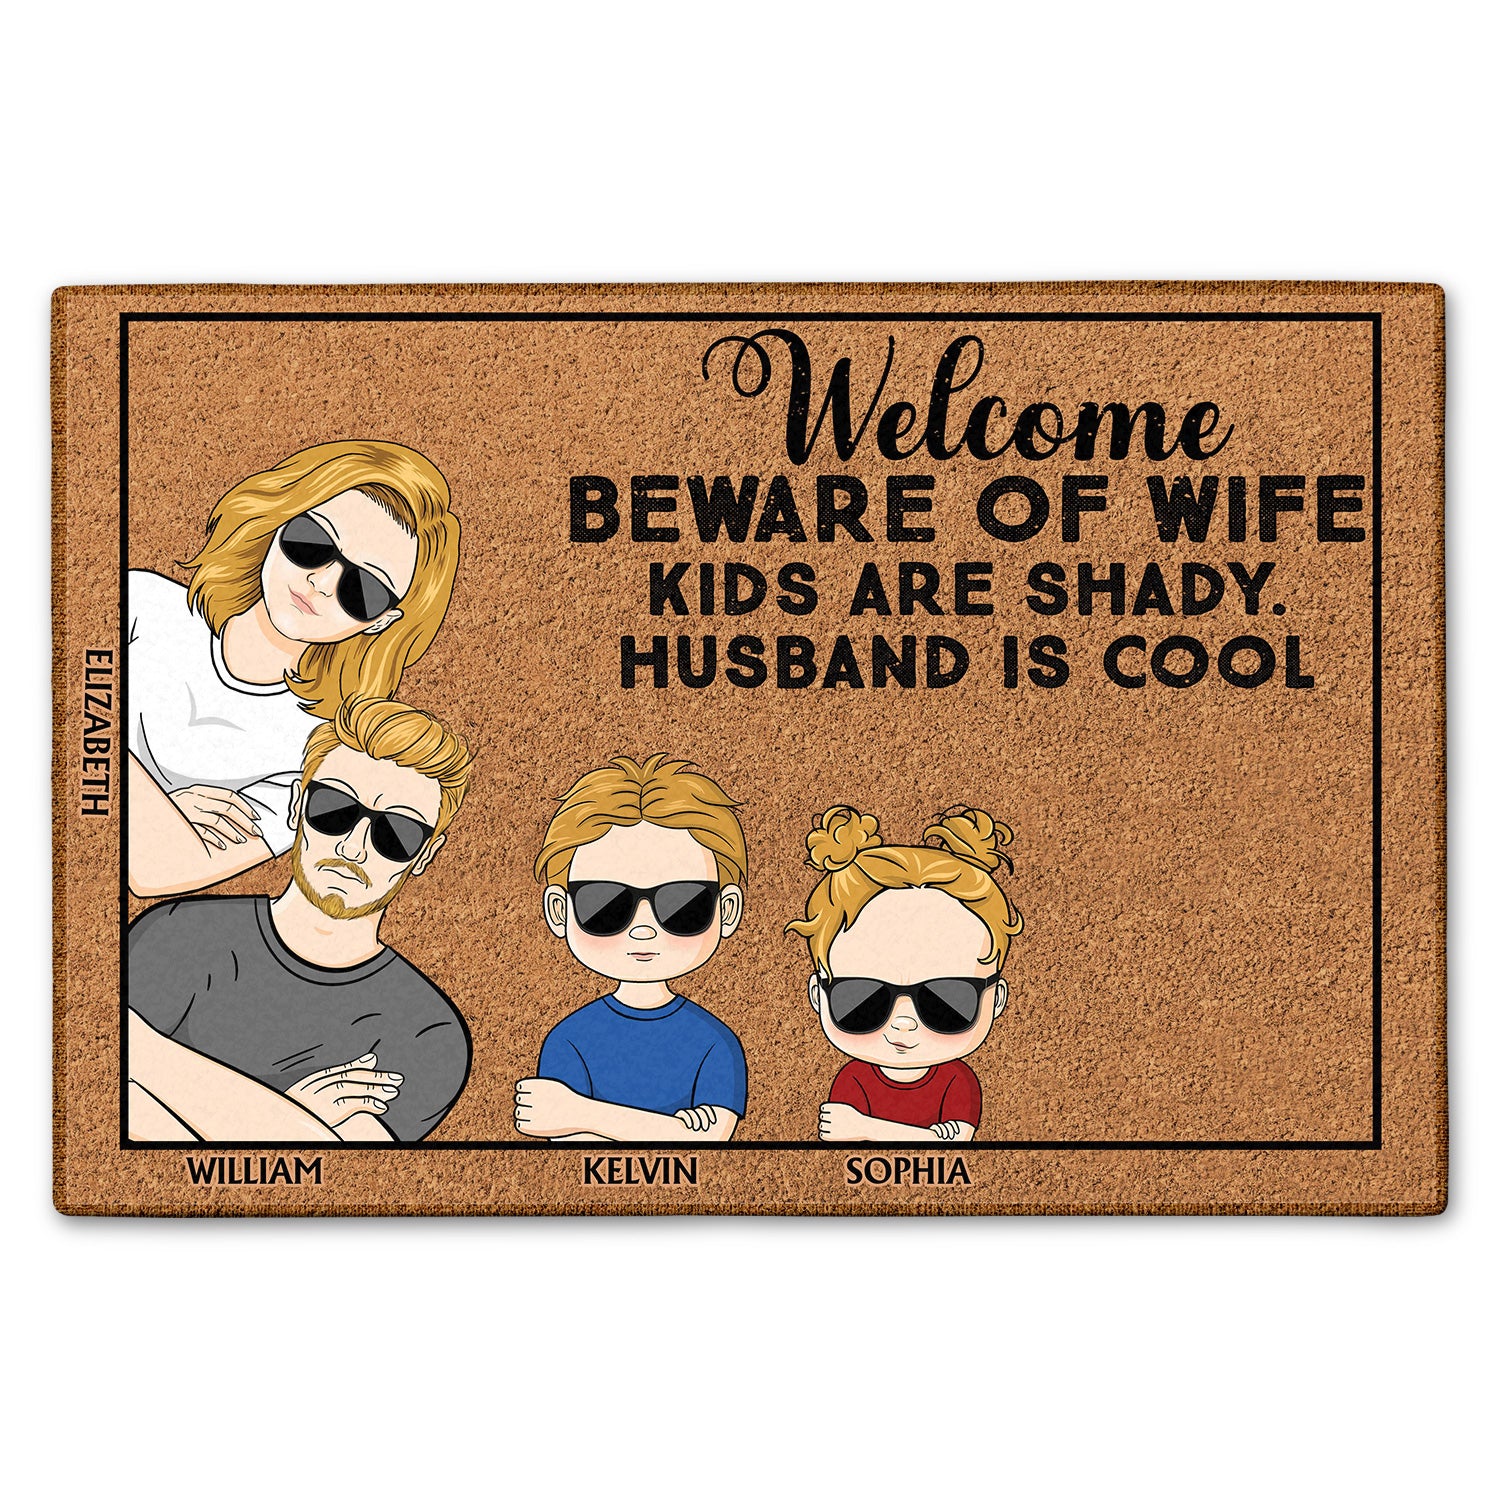 Beware Of Wife Kids Are Shady Husband Is Cool Couple - Anniversary, Birthday, Housewarming Gift For Spouse, Husband, Wife, Family - Personalized Custom Doormat